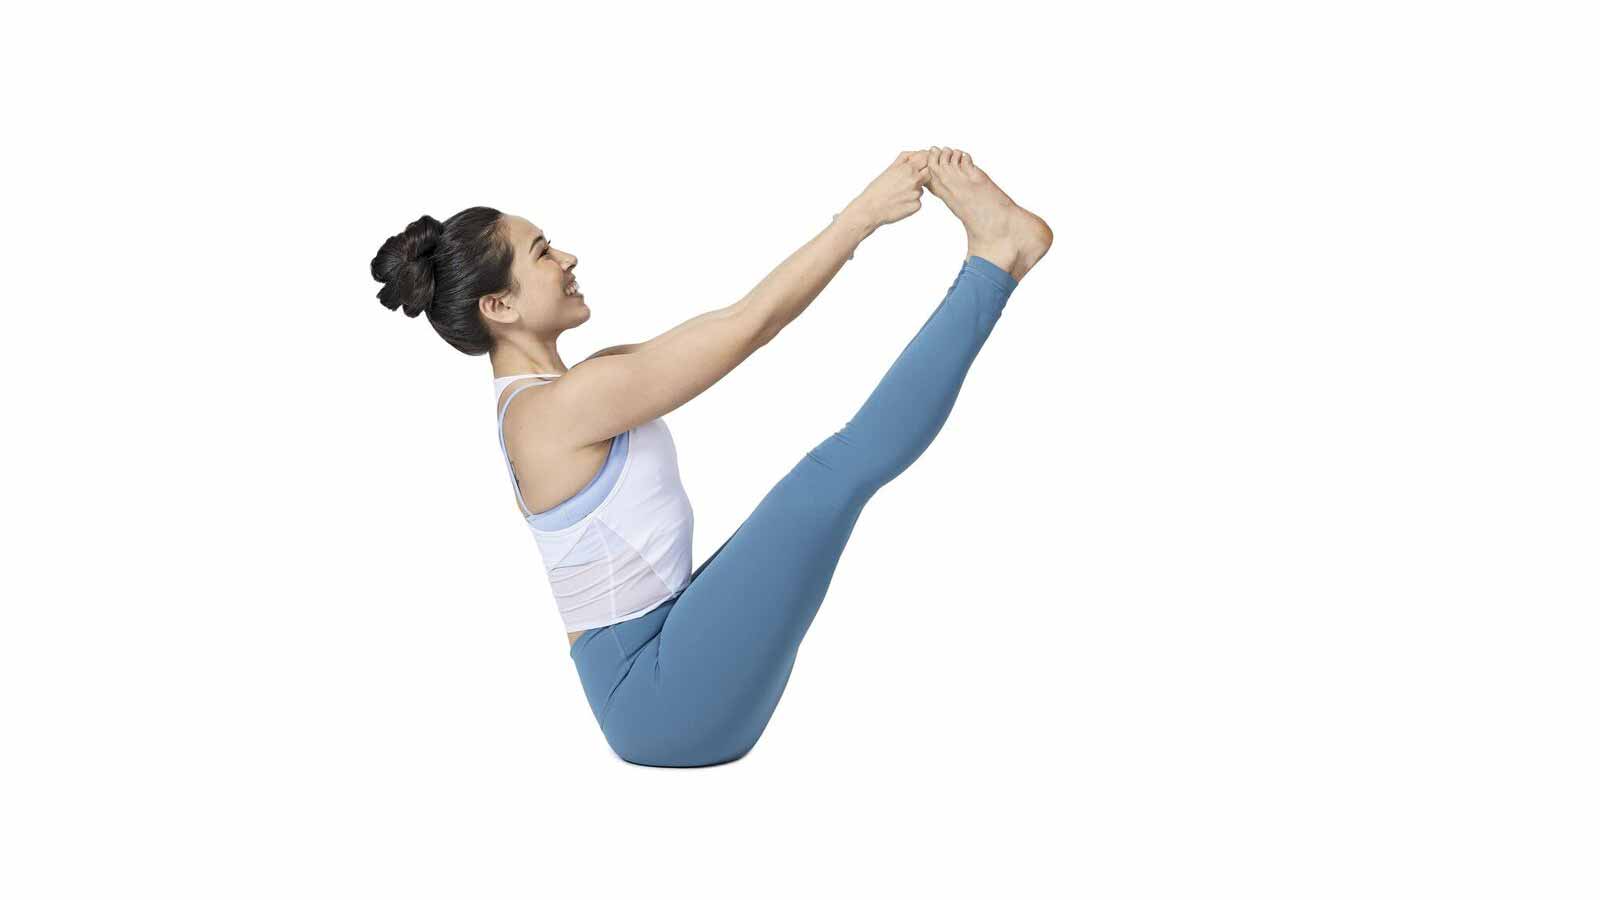 Yoga Strike - Yoga poses for a balanced body and strong core [hold each pose  for 5-10 deep breaths long, always practice backbends mindfully 📷  @zoewoodwardyoga ✍️ Yoga Poses: 1. Half forward